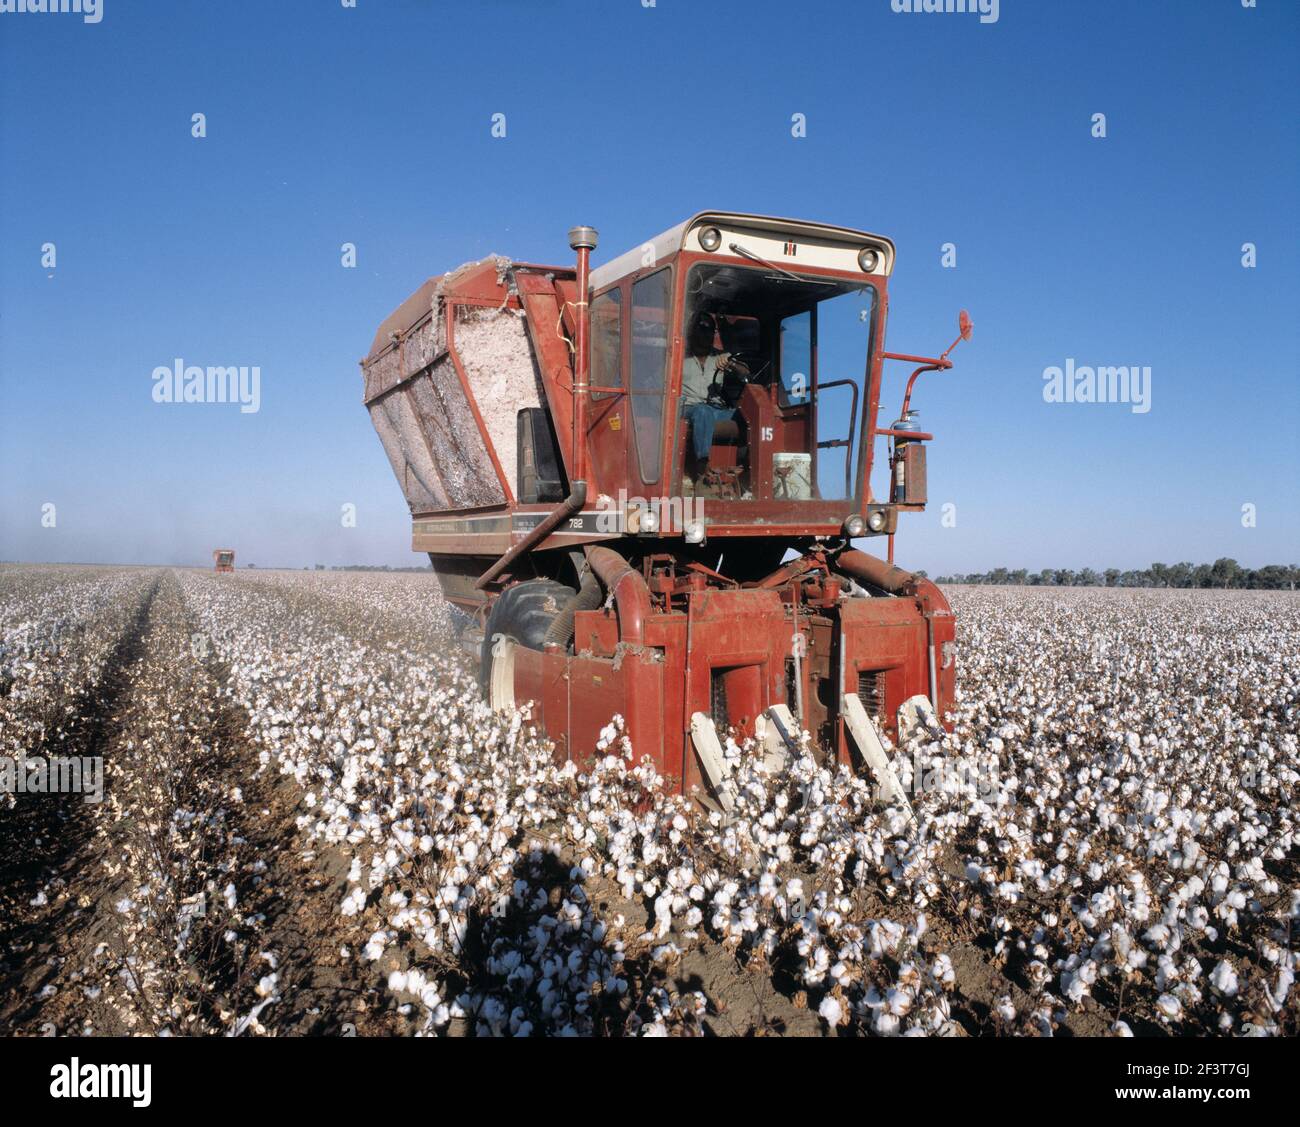 Australia. New South Wales. Agriculture. Cotton crop harvest. Stock Photo